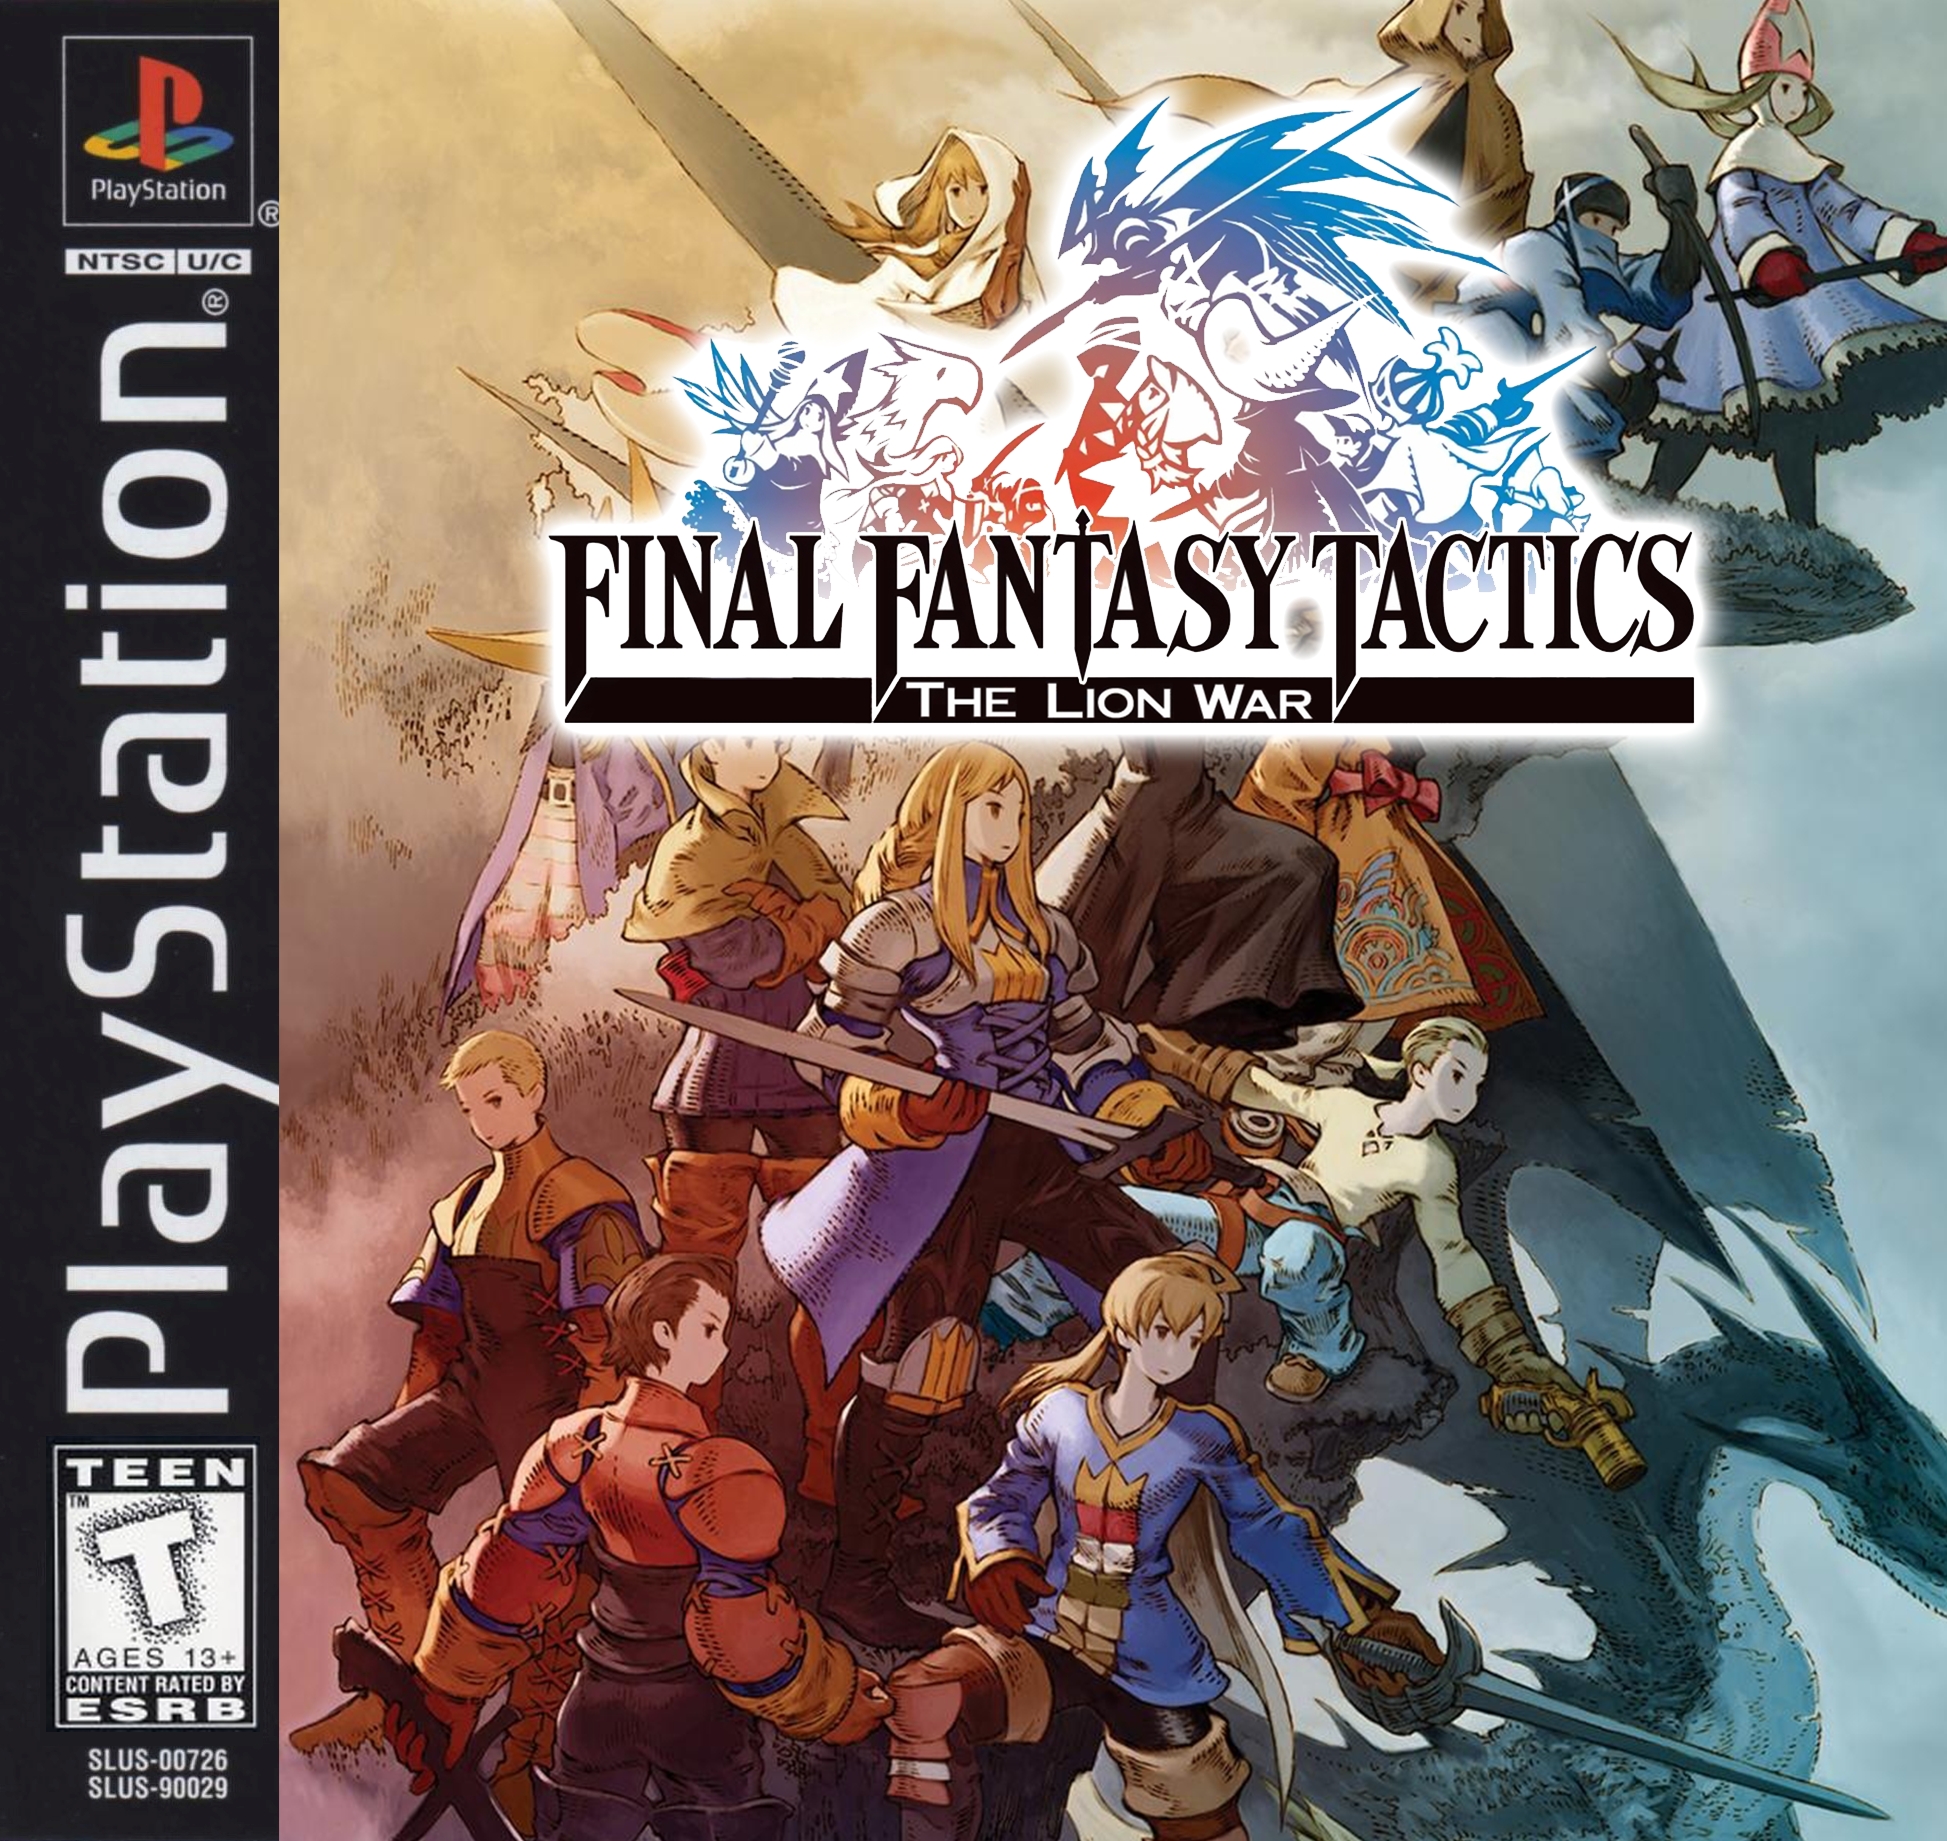 tgdb-browse-game-final-fantasy-tactics-the-lion-war-2-021-romhack